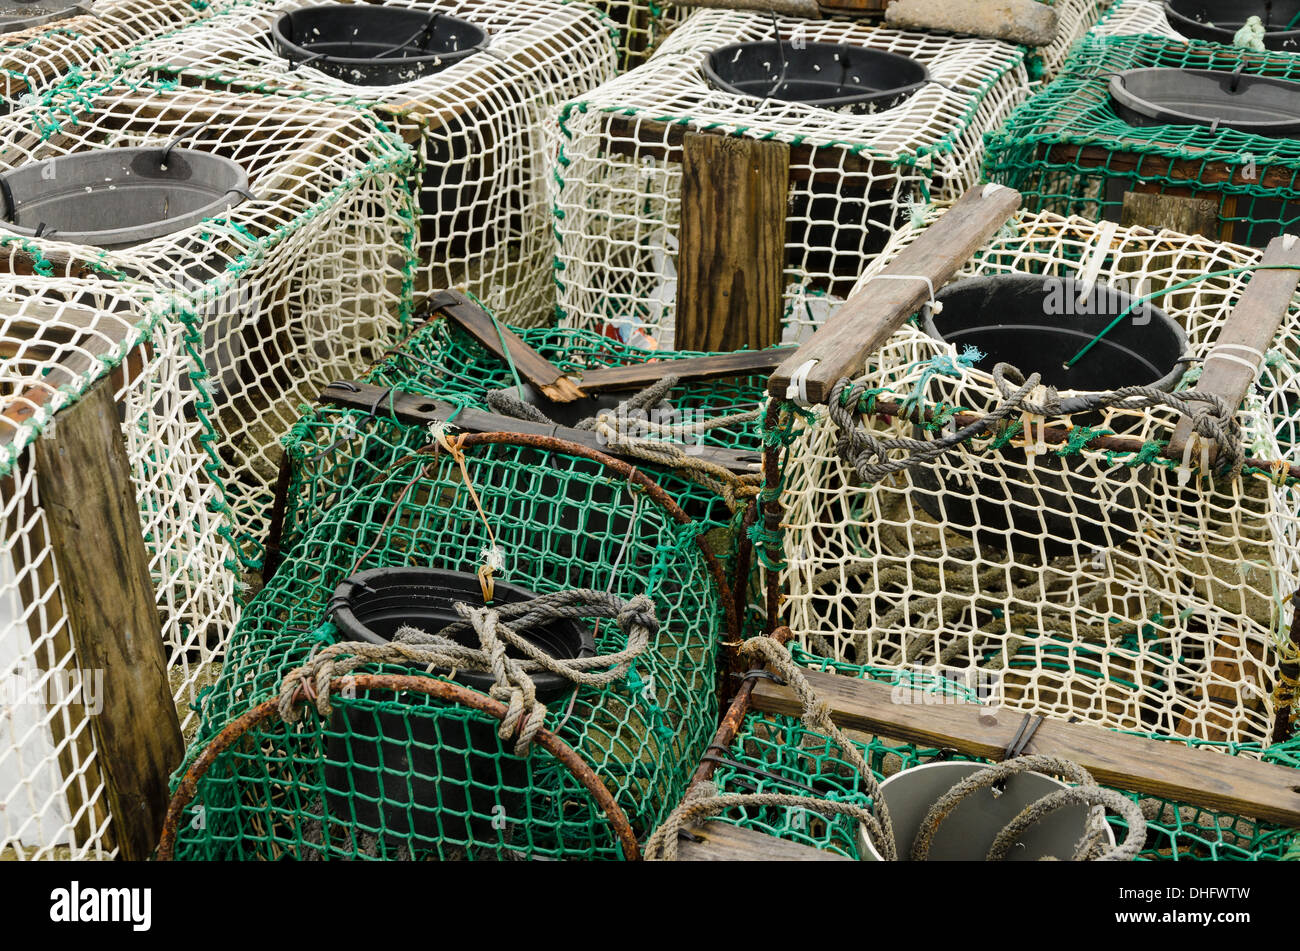 Several aligned Crabbing traps in a fishing port in northern Spain Stock Photo